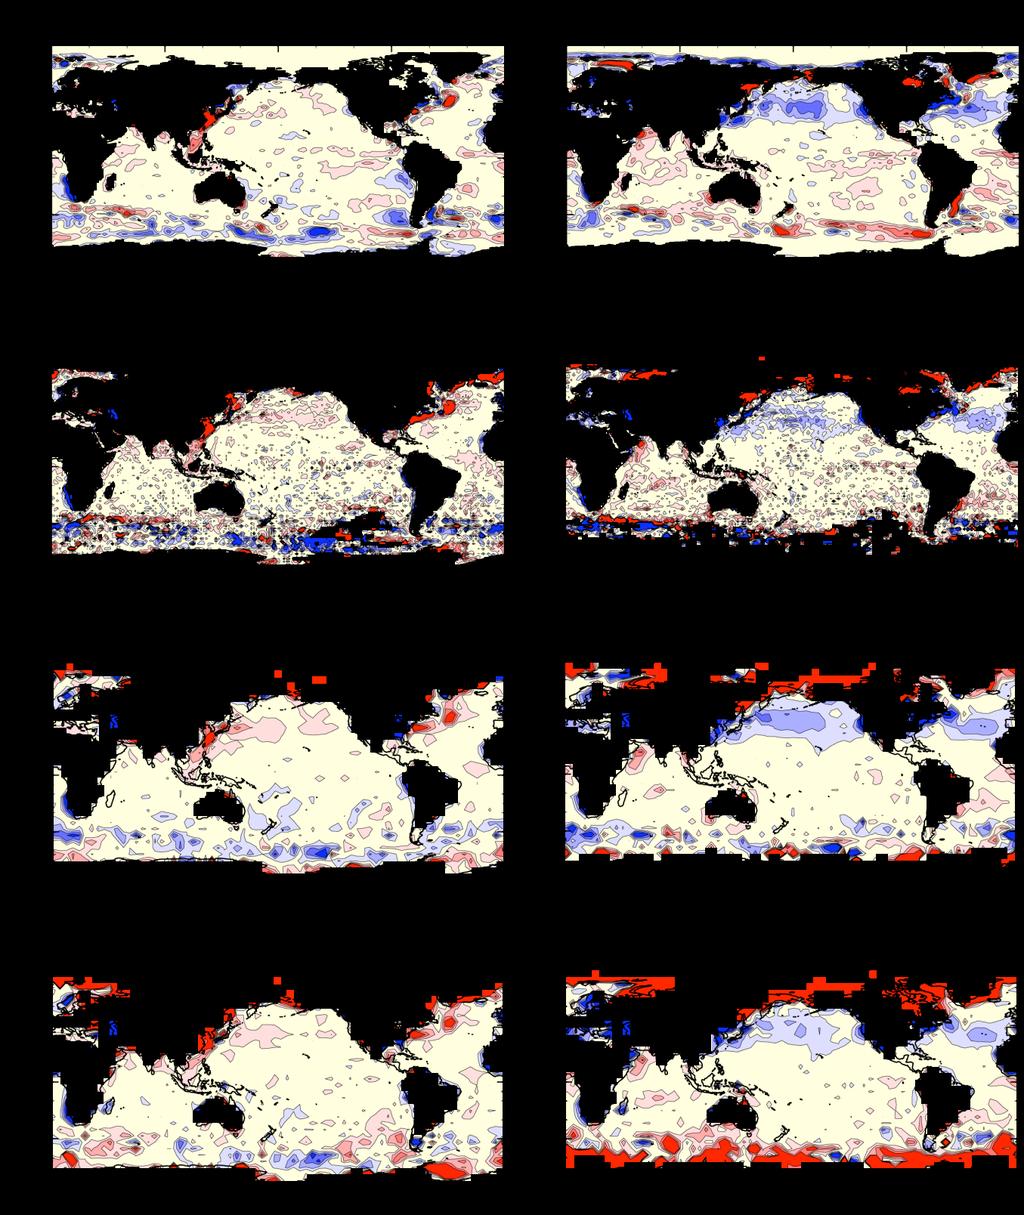 < Climatology > Differences are < 0.5ºC over the most of the oceans, > 1ºC in the WBC regions and at high-latitudes.